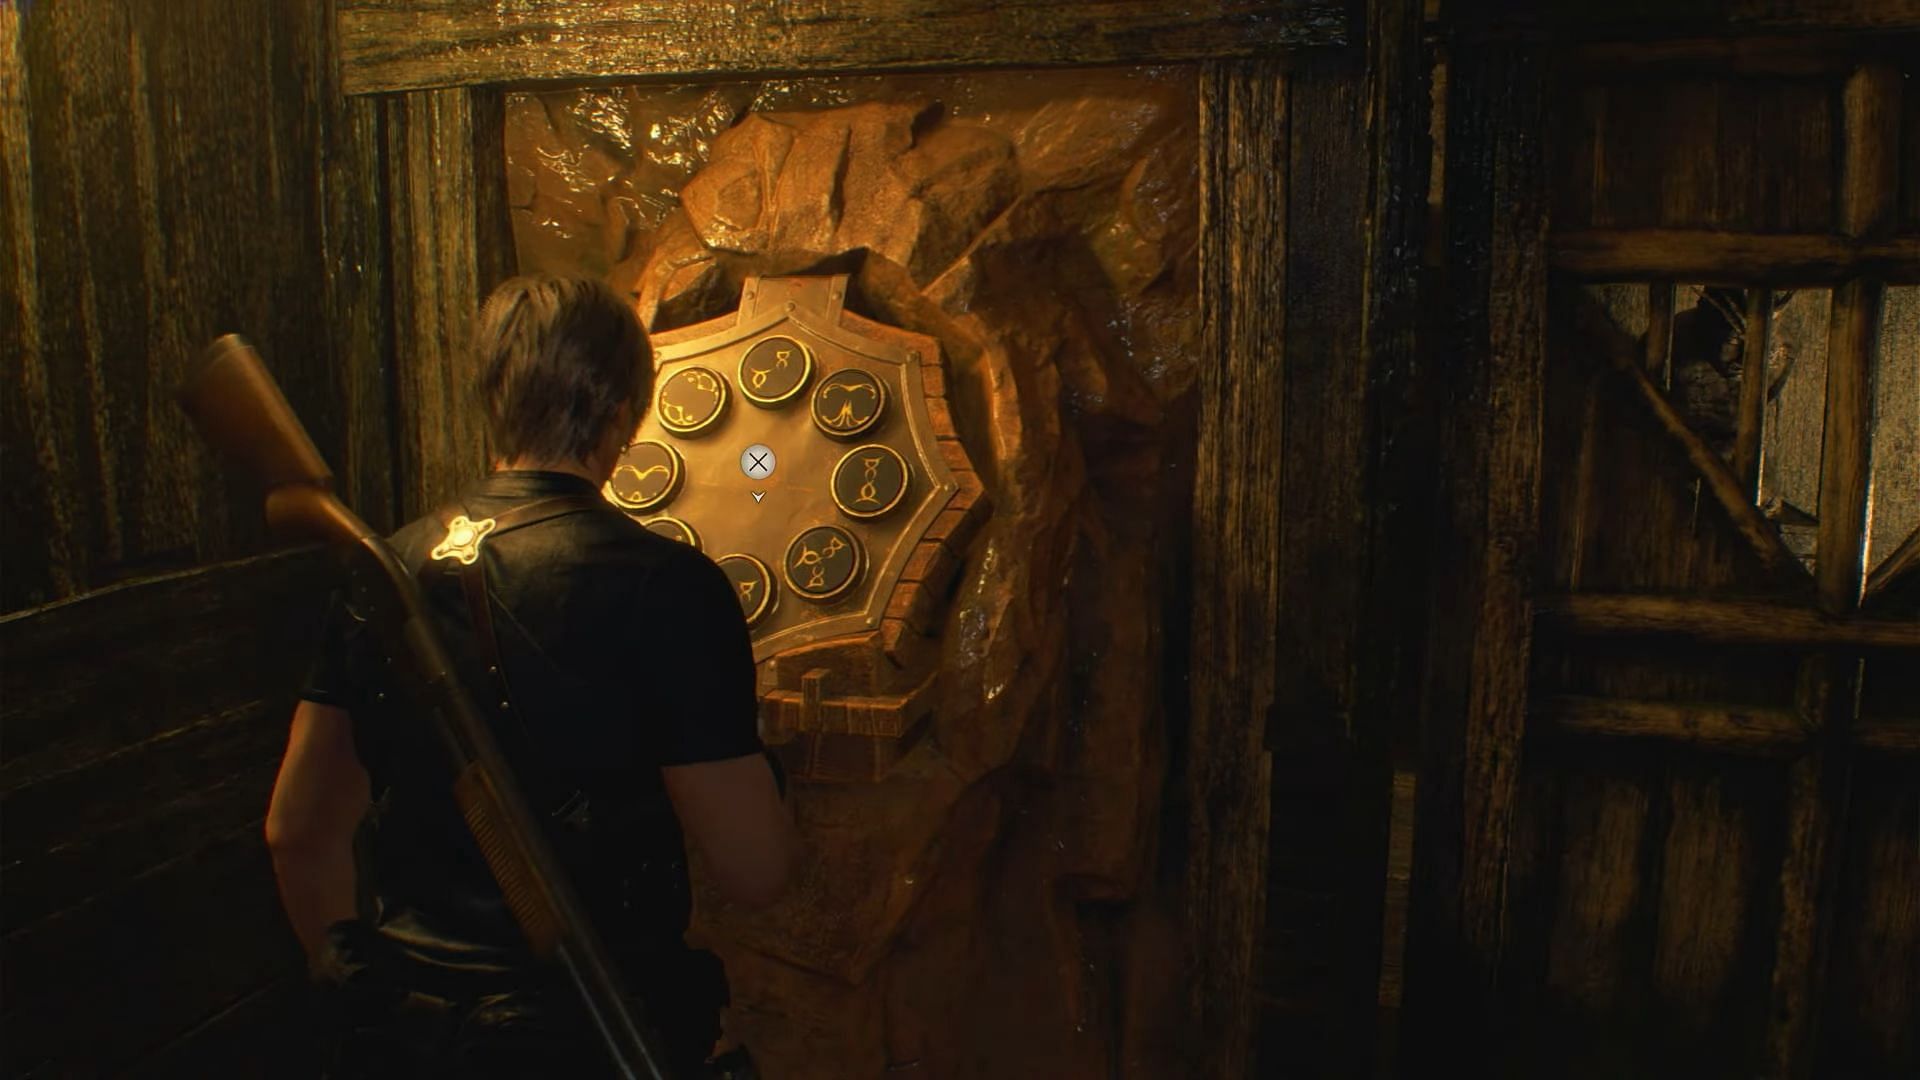 The lake cave button puzzles can be quite tricky to solve in the Resident Evil 4 Remake (Image via YouTube/WoW Quests)